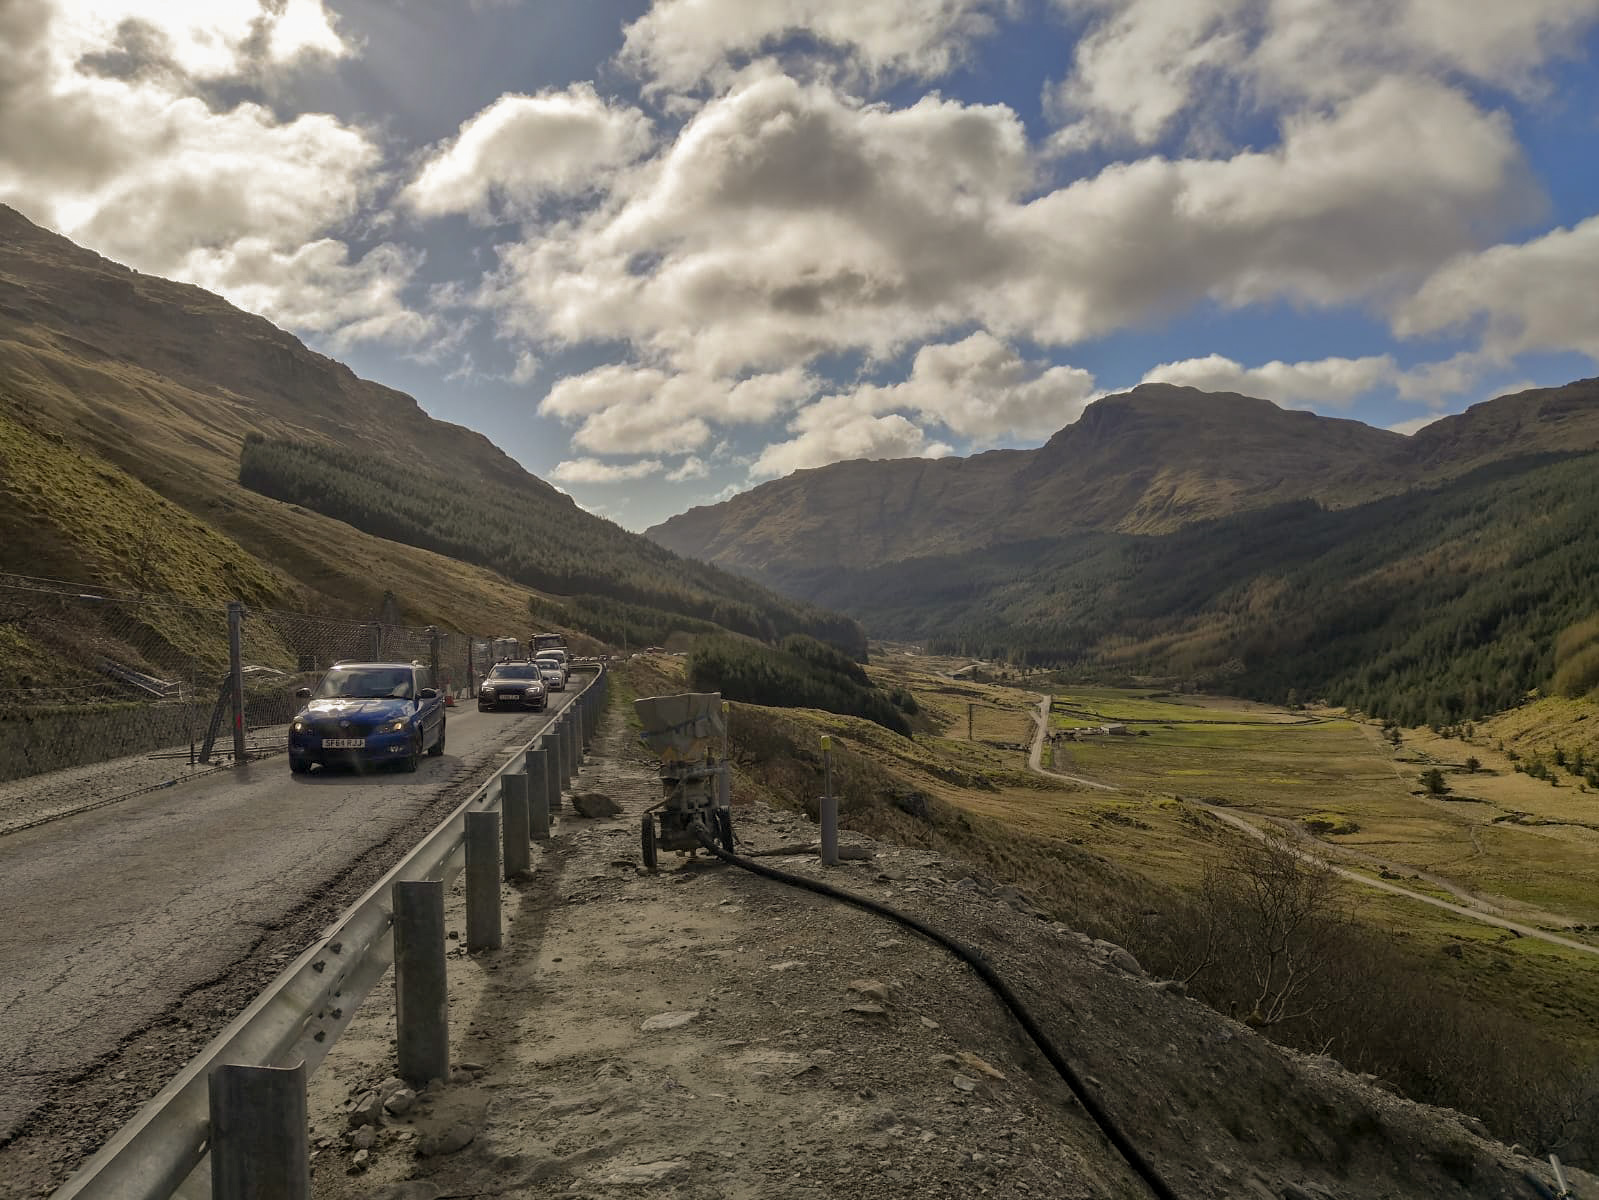 A83 AT REST AND BE THANKFUL – TRAFFIC TO BE DIVERTED ONTO OLD MILITARY ROAD LOCAL DIVERSION ROUTE